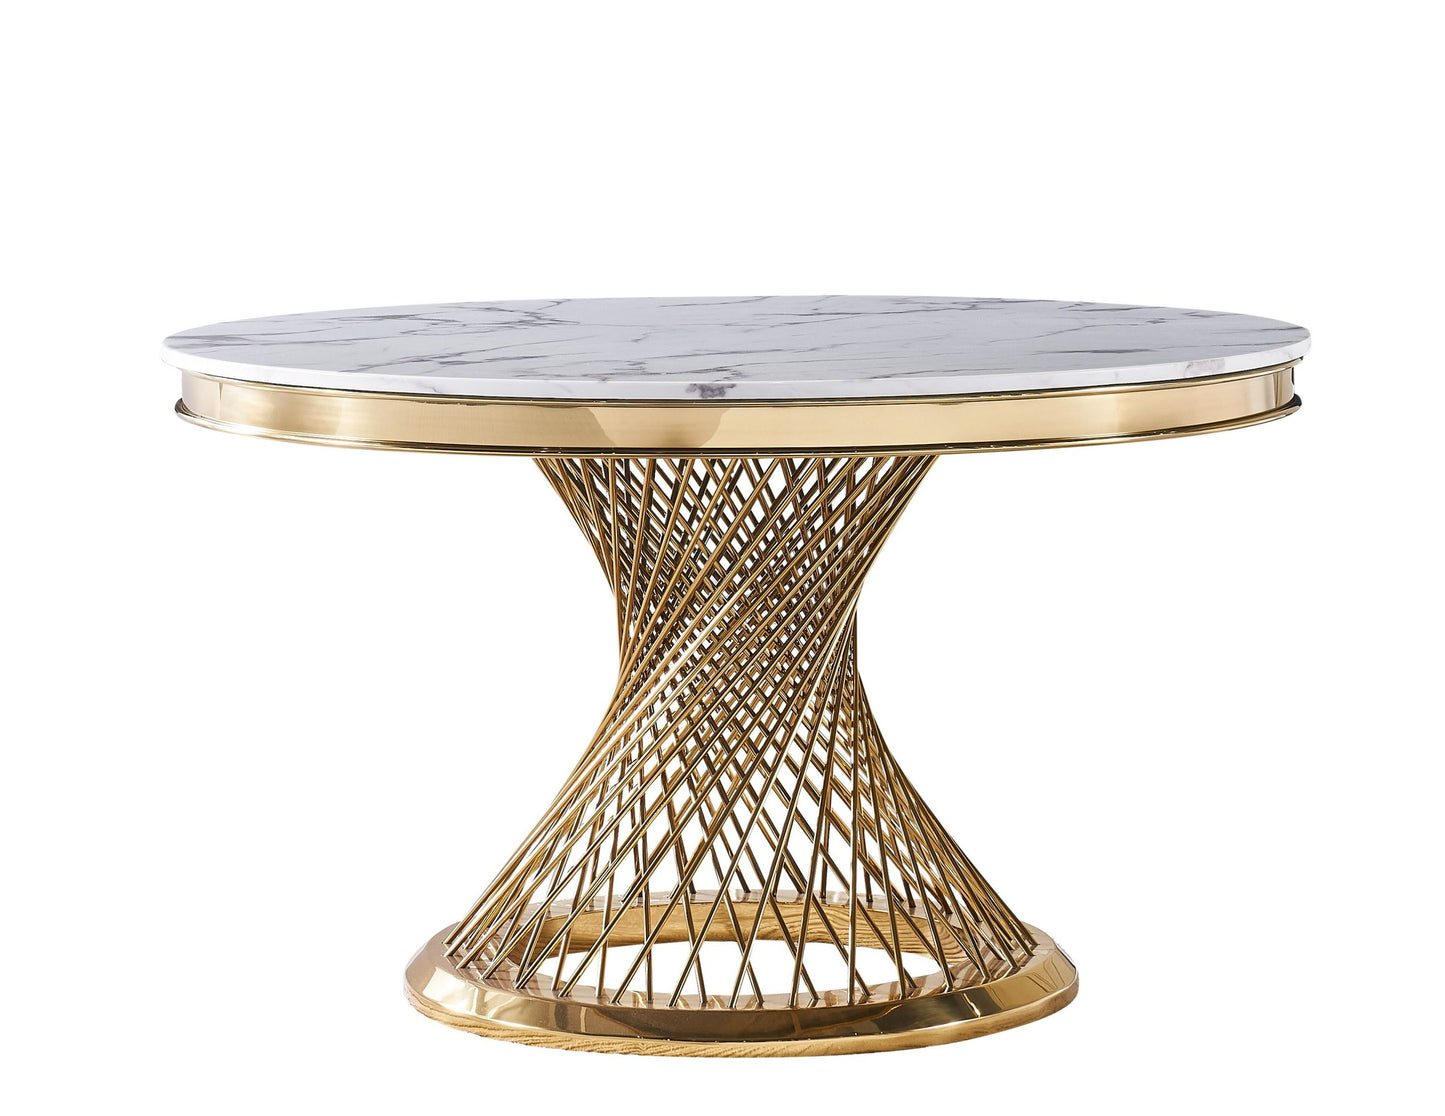 Modrest Potter - White Marble & Gold Stainless Steel Round Dining Table